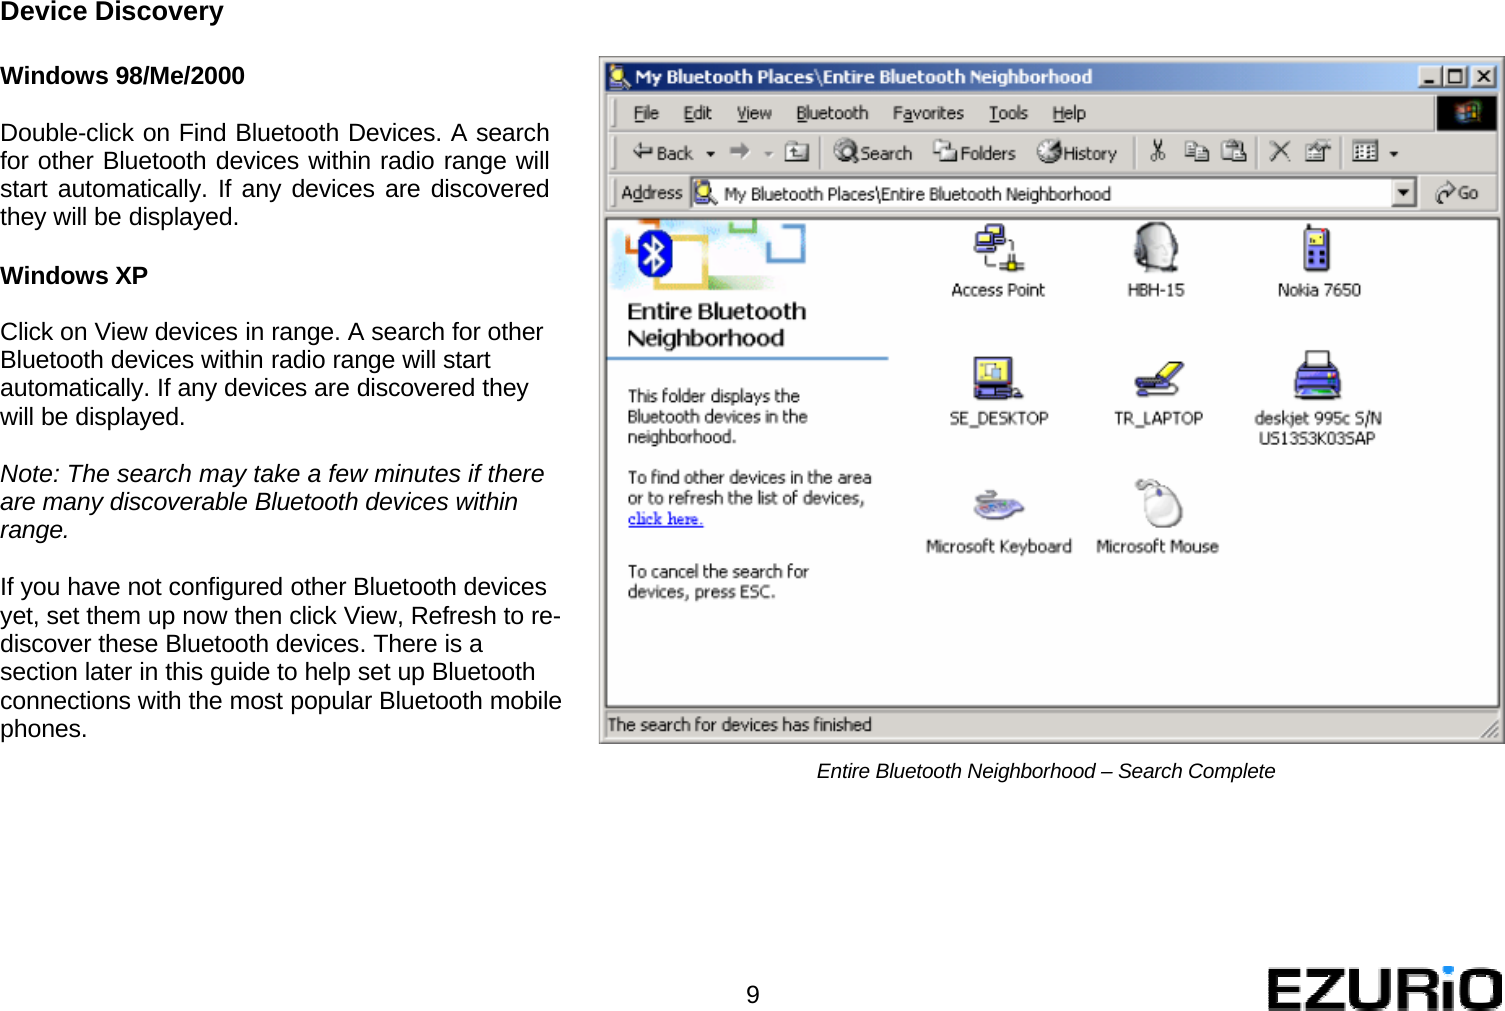   Device Discovery   Windows 98/Me/2000  Double-click on Find Bluetooth Devices. A search for other Bluetooth devices within radio range will start automatically. If any devices are discovered they will be displayed.   Windows XP  Click on View devices in range. A search for other Bluetooth devices within radio range will start automatically. If any devices are discovered they will be displayed.  Note: The search may take a few minutes if there are many discoverable Bluetooth devices within range.  If you have not configured other Bluetooth devices yet, set them up now then click View, Refresh to re- discover these Bluetooth devices. There is a section later in this guide to help set up Bluetooth connections with the most popular Bluetooth mobile phones.            Entire Bluetooth Neighborhood – Search Complete            9 